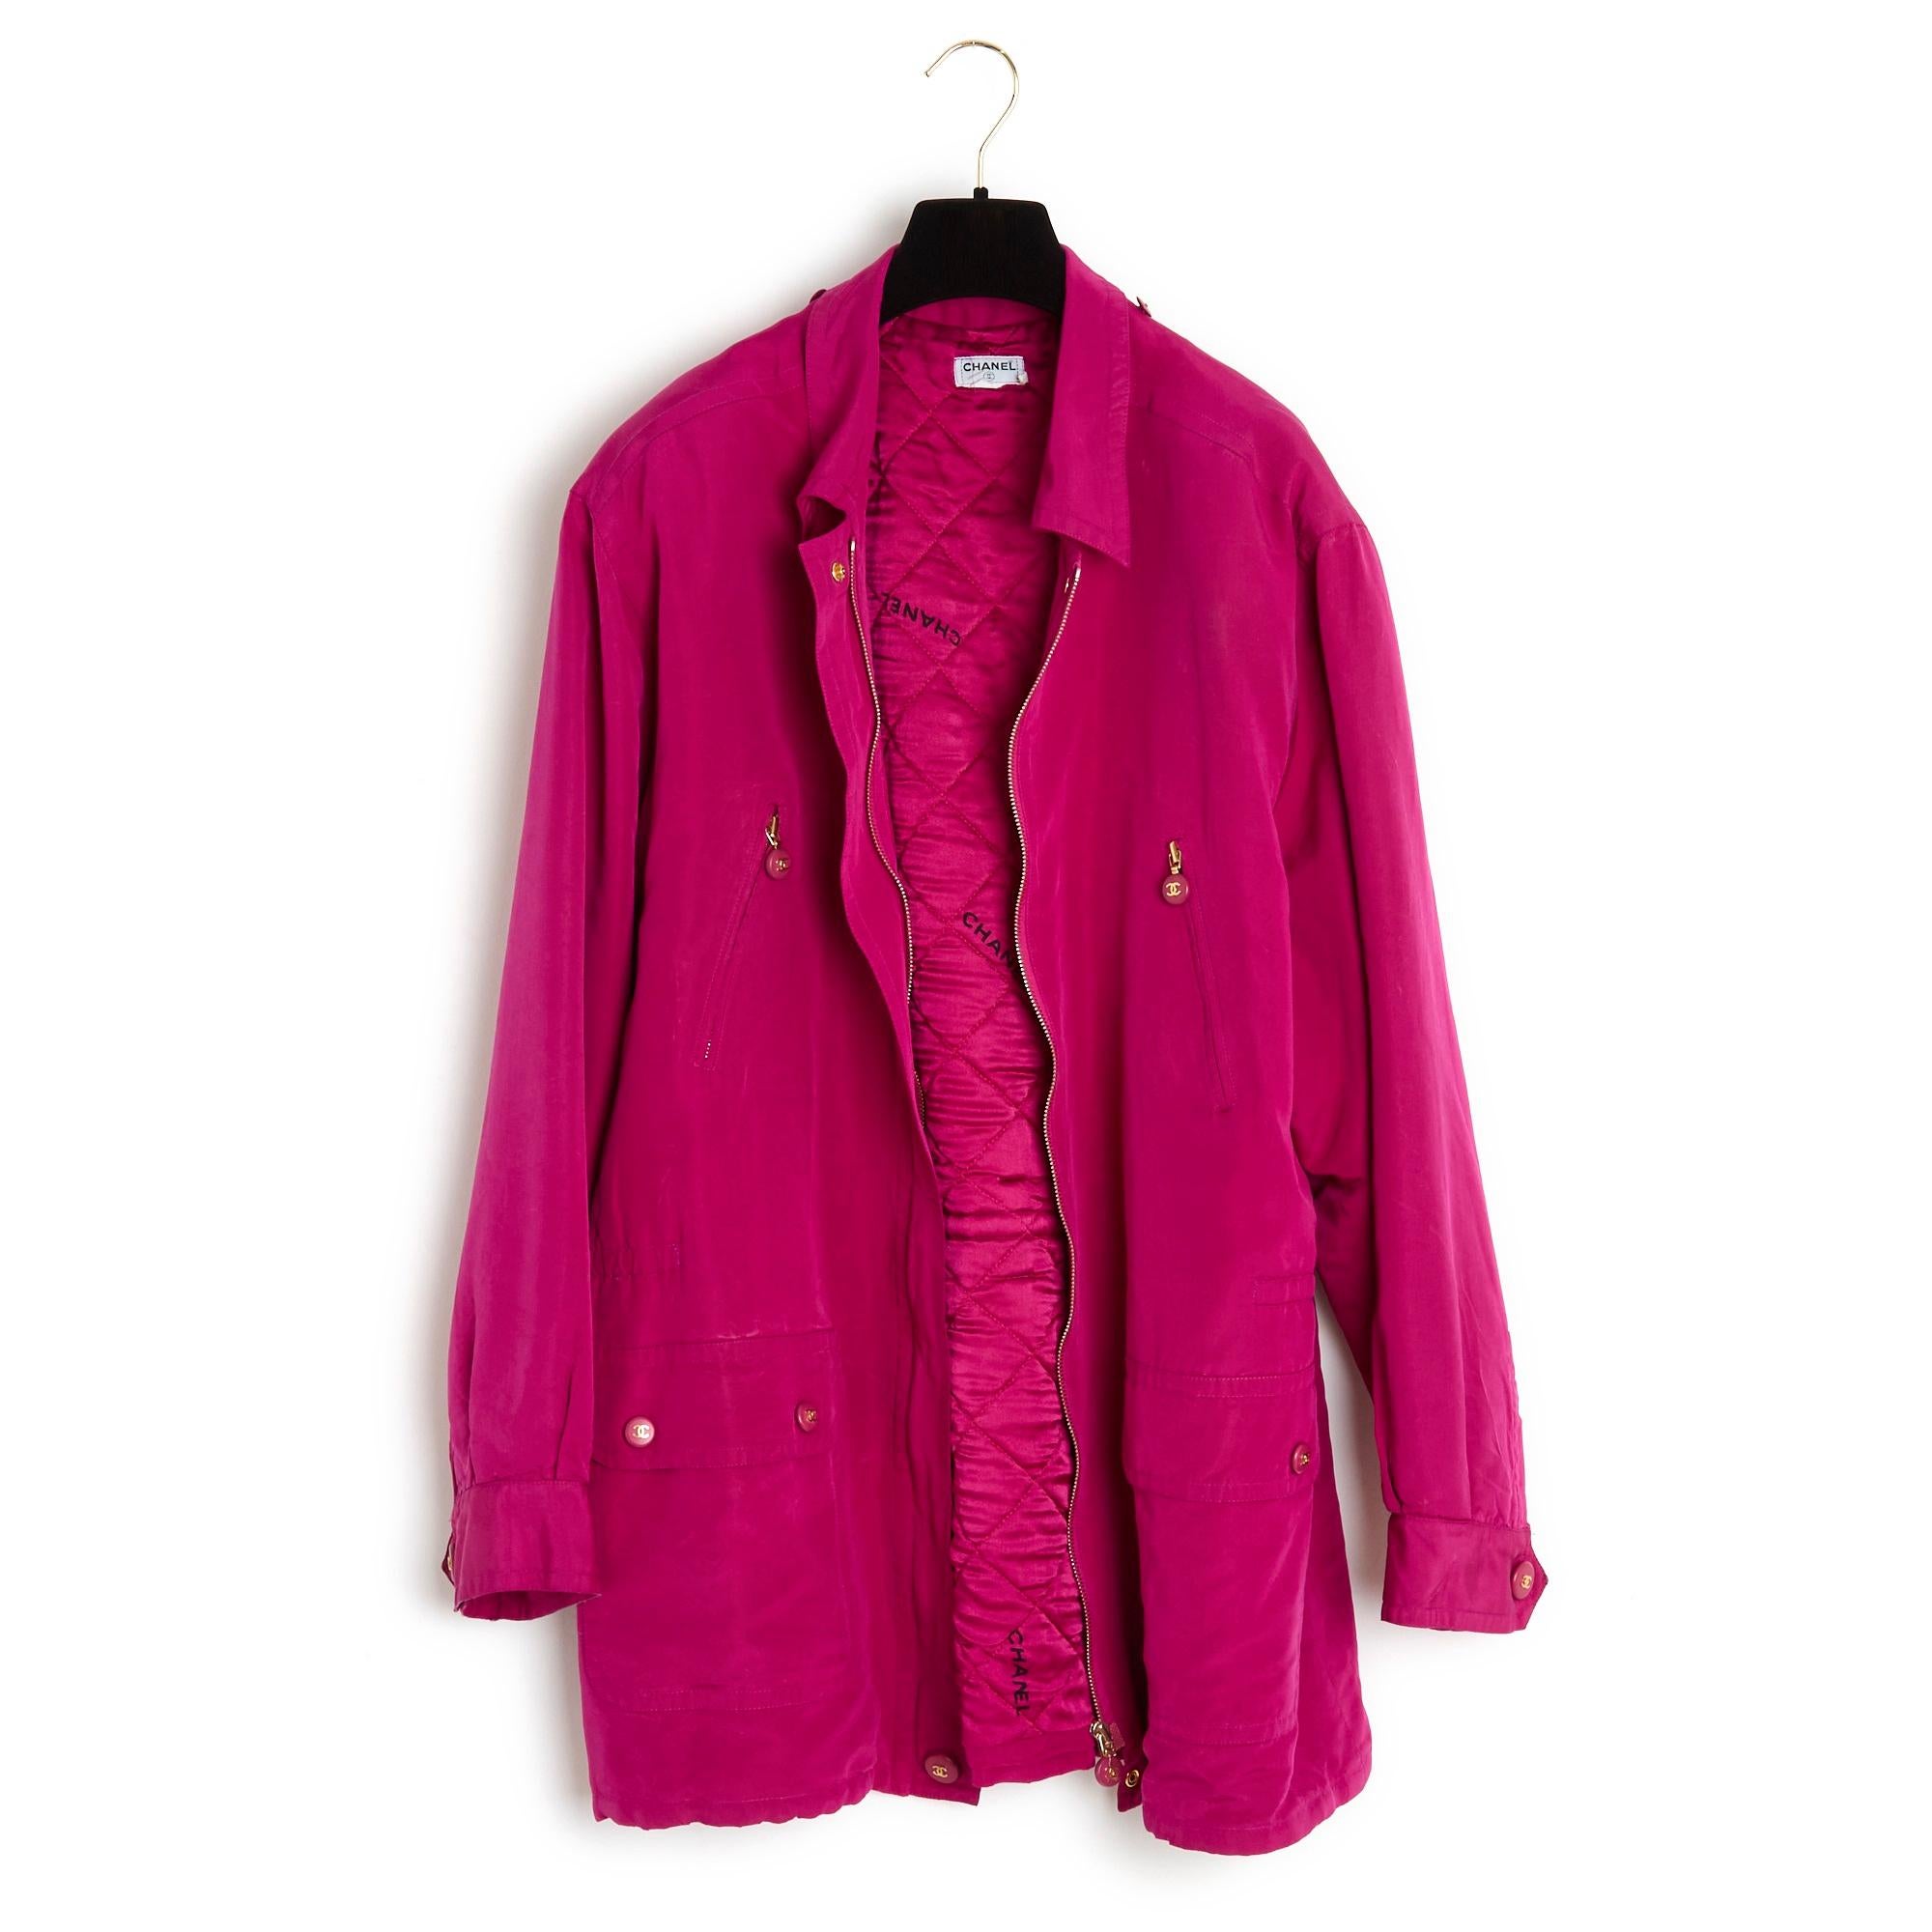 Chanel parka jacket AW1994 collection oversized volume in strong pink silk ottoman, classic collar closed by a long gold metal zipper with CC logo zipper and 2 snaps decorated with the same pattern, removable hood held by 5 coordinated buttons, 2